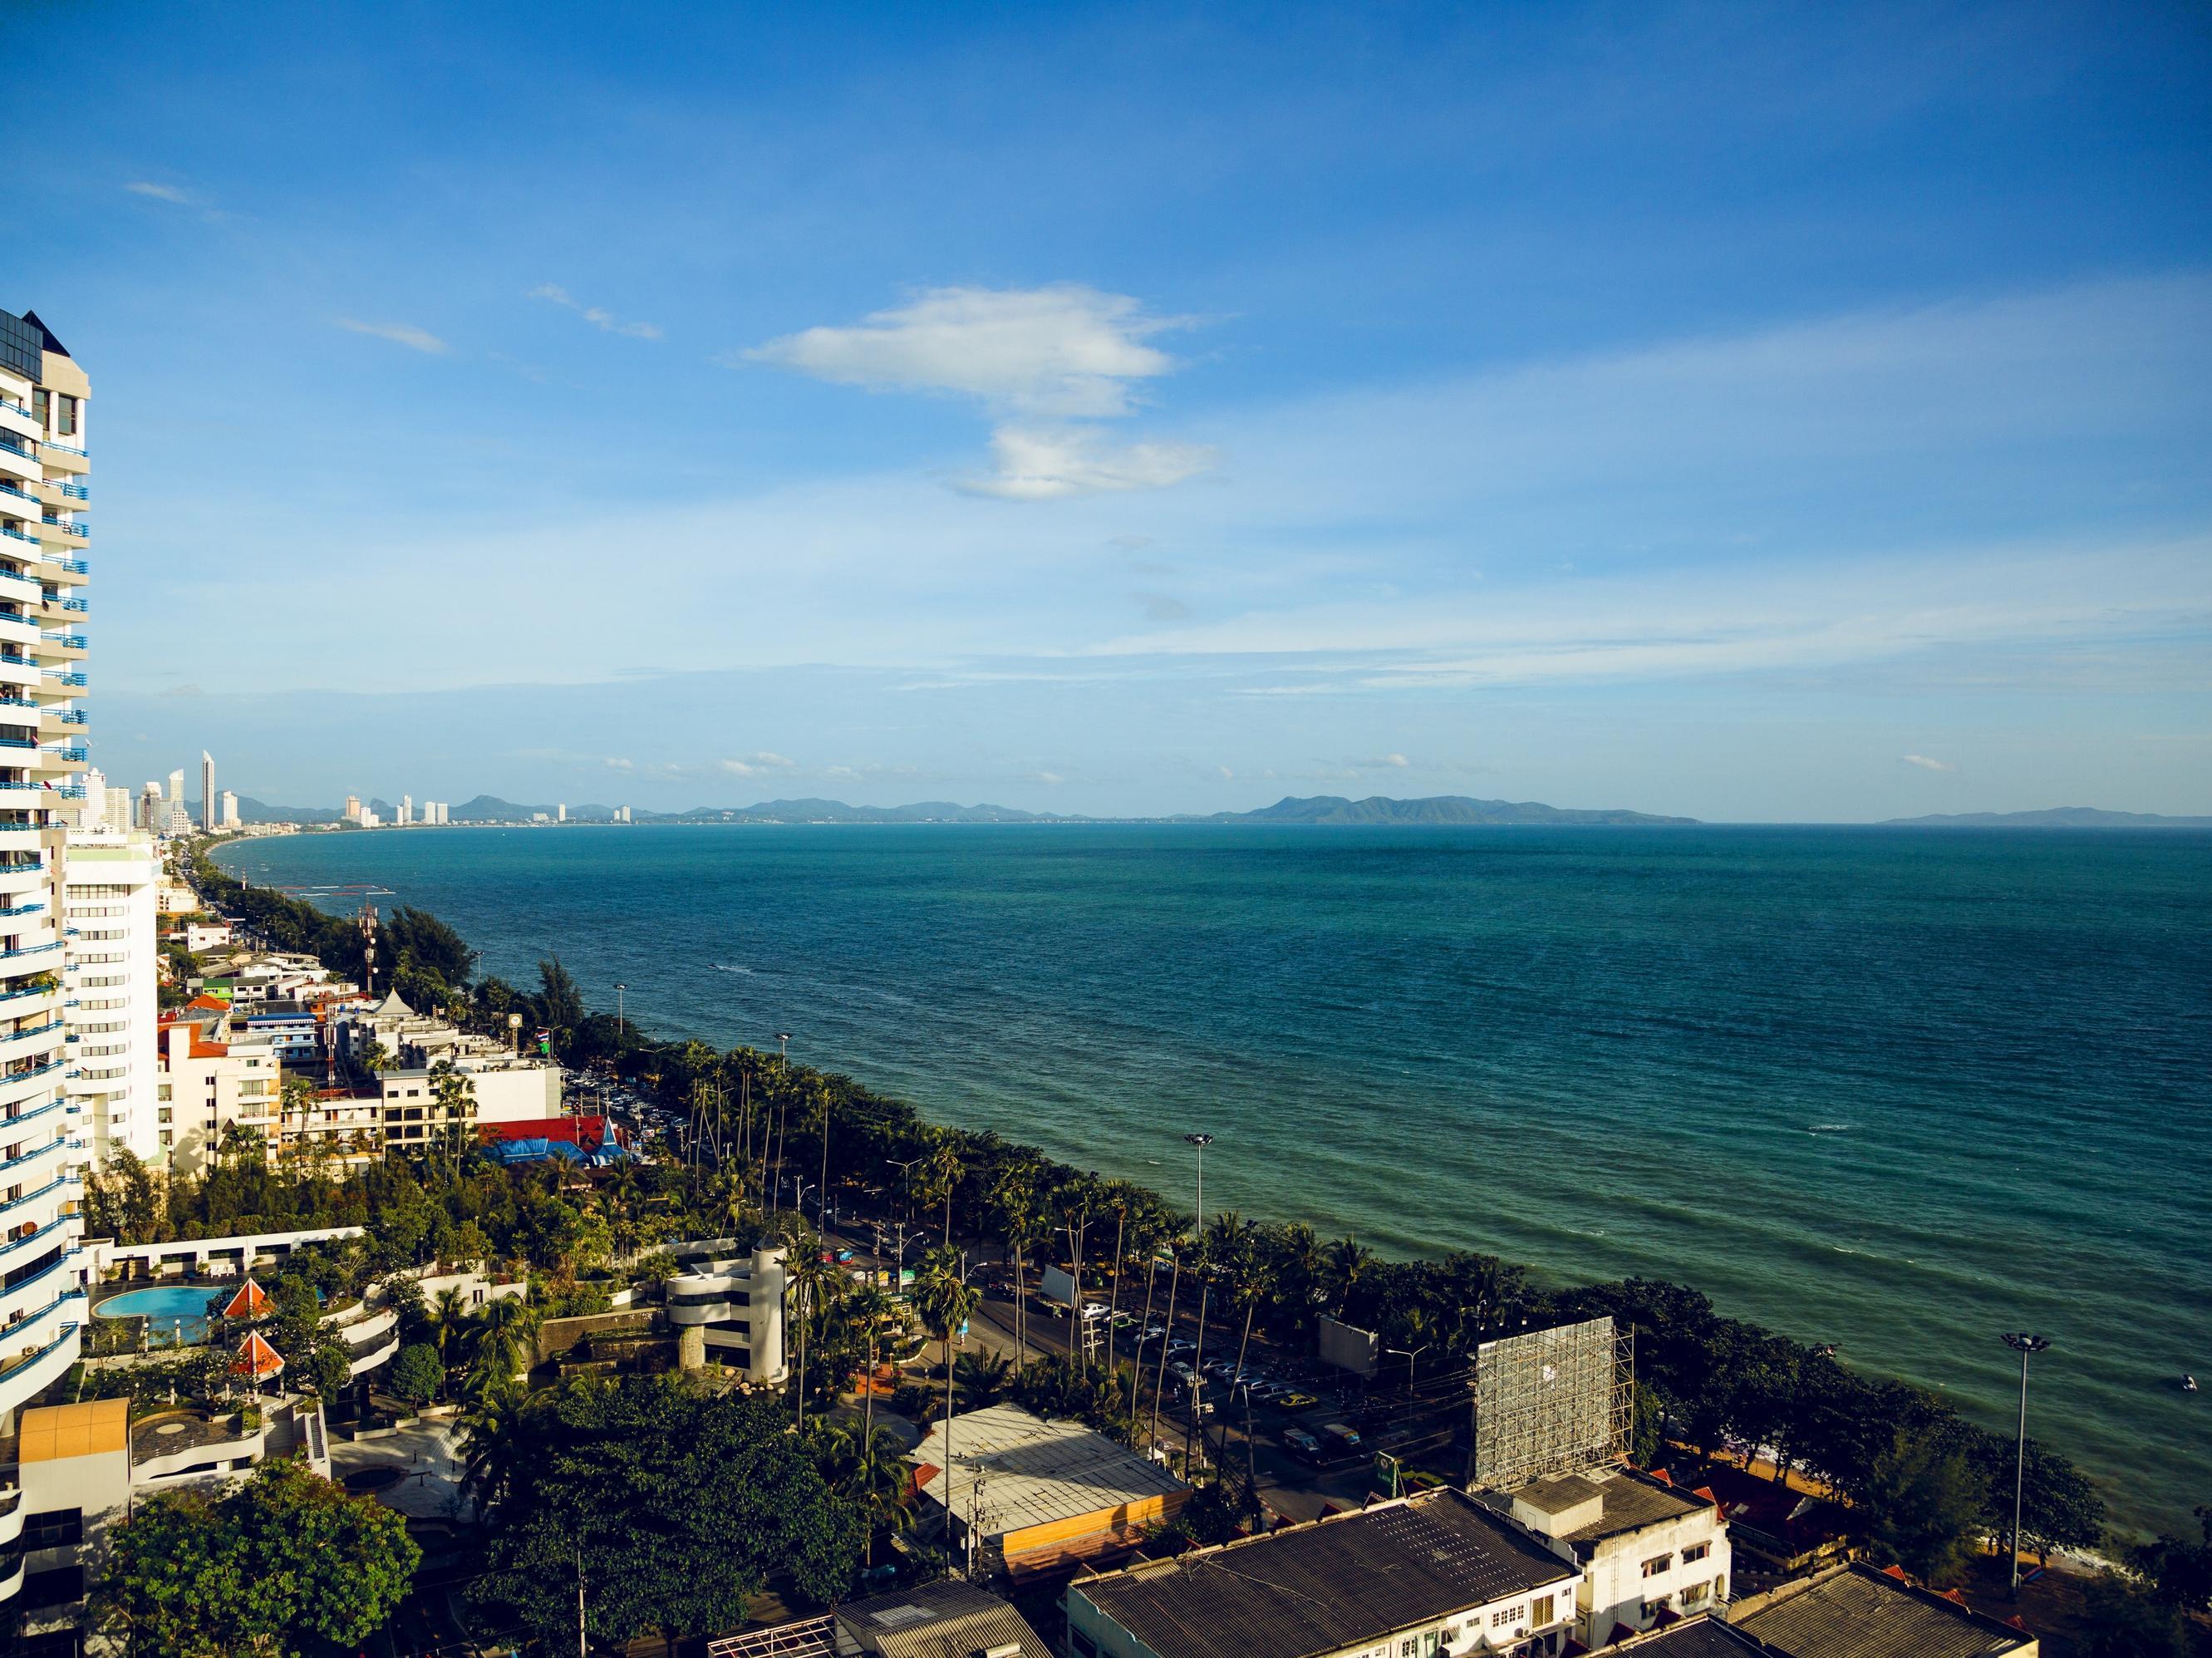 View Talay Condominium 7 by VLAD Property Thailand FAQ 2016, What facilities are there in View Talay Condominium 7 by VLAD Property Thailand 2016, What Languages Spoken are Supported in View Talay Condominium 7 by VLAD Property Thailand 2016, Which payment cards are accepted in View Talay Condominium 7 by VLAD Property Thailand , Thailand View Talay Condominium 7 by VLAD Property room facilities and services Q&A 2016, Thailand View Talay Condominium 7 by VLAD Property online booking services 2016, Thailand View Talay Condominium 7 by VLAD Property address 2016, Thailand View Talay Condominium 7 by VLAD Property telephone number 2016,Thailand View Talay Condominium 7 by VLAD Property map 2016, Thailand View Talay Condominium 7 by VLAD Property traffic guide 2016, how to go Thailand View Talay Condominium 7 by VLAD Property, Thailand View Talay Condominium 7 by VLAD Property booking online 2016, Thailand View Talay Condominium 7 by VLAD Property room types 2016.